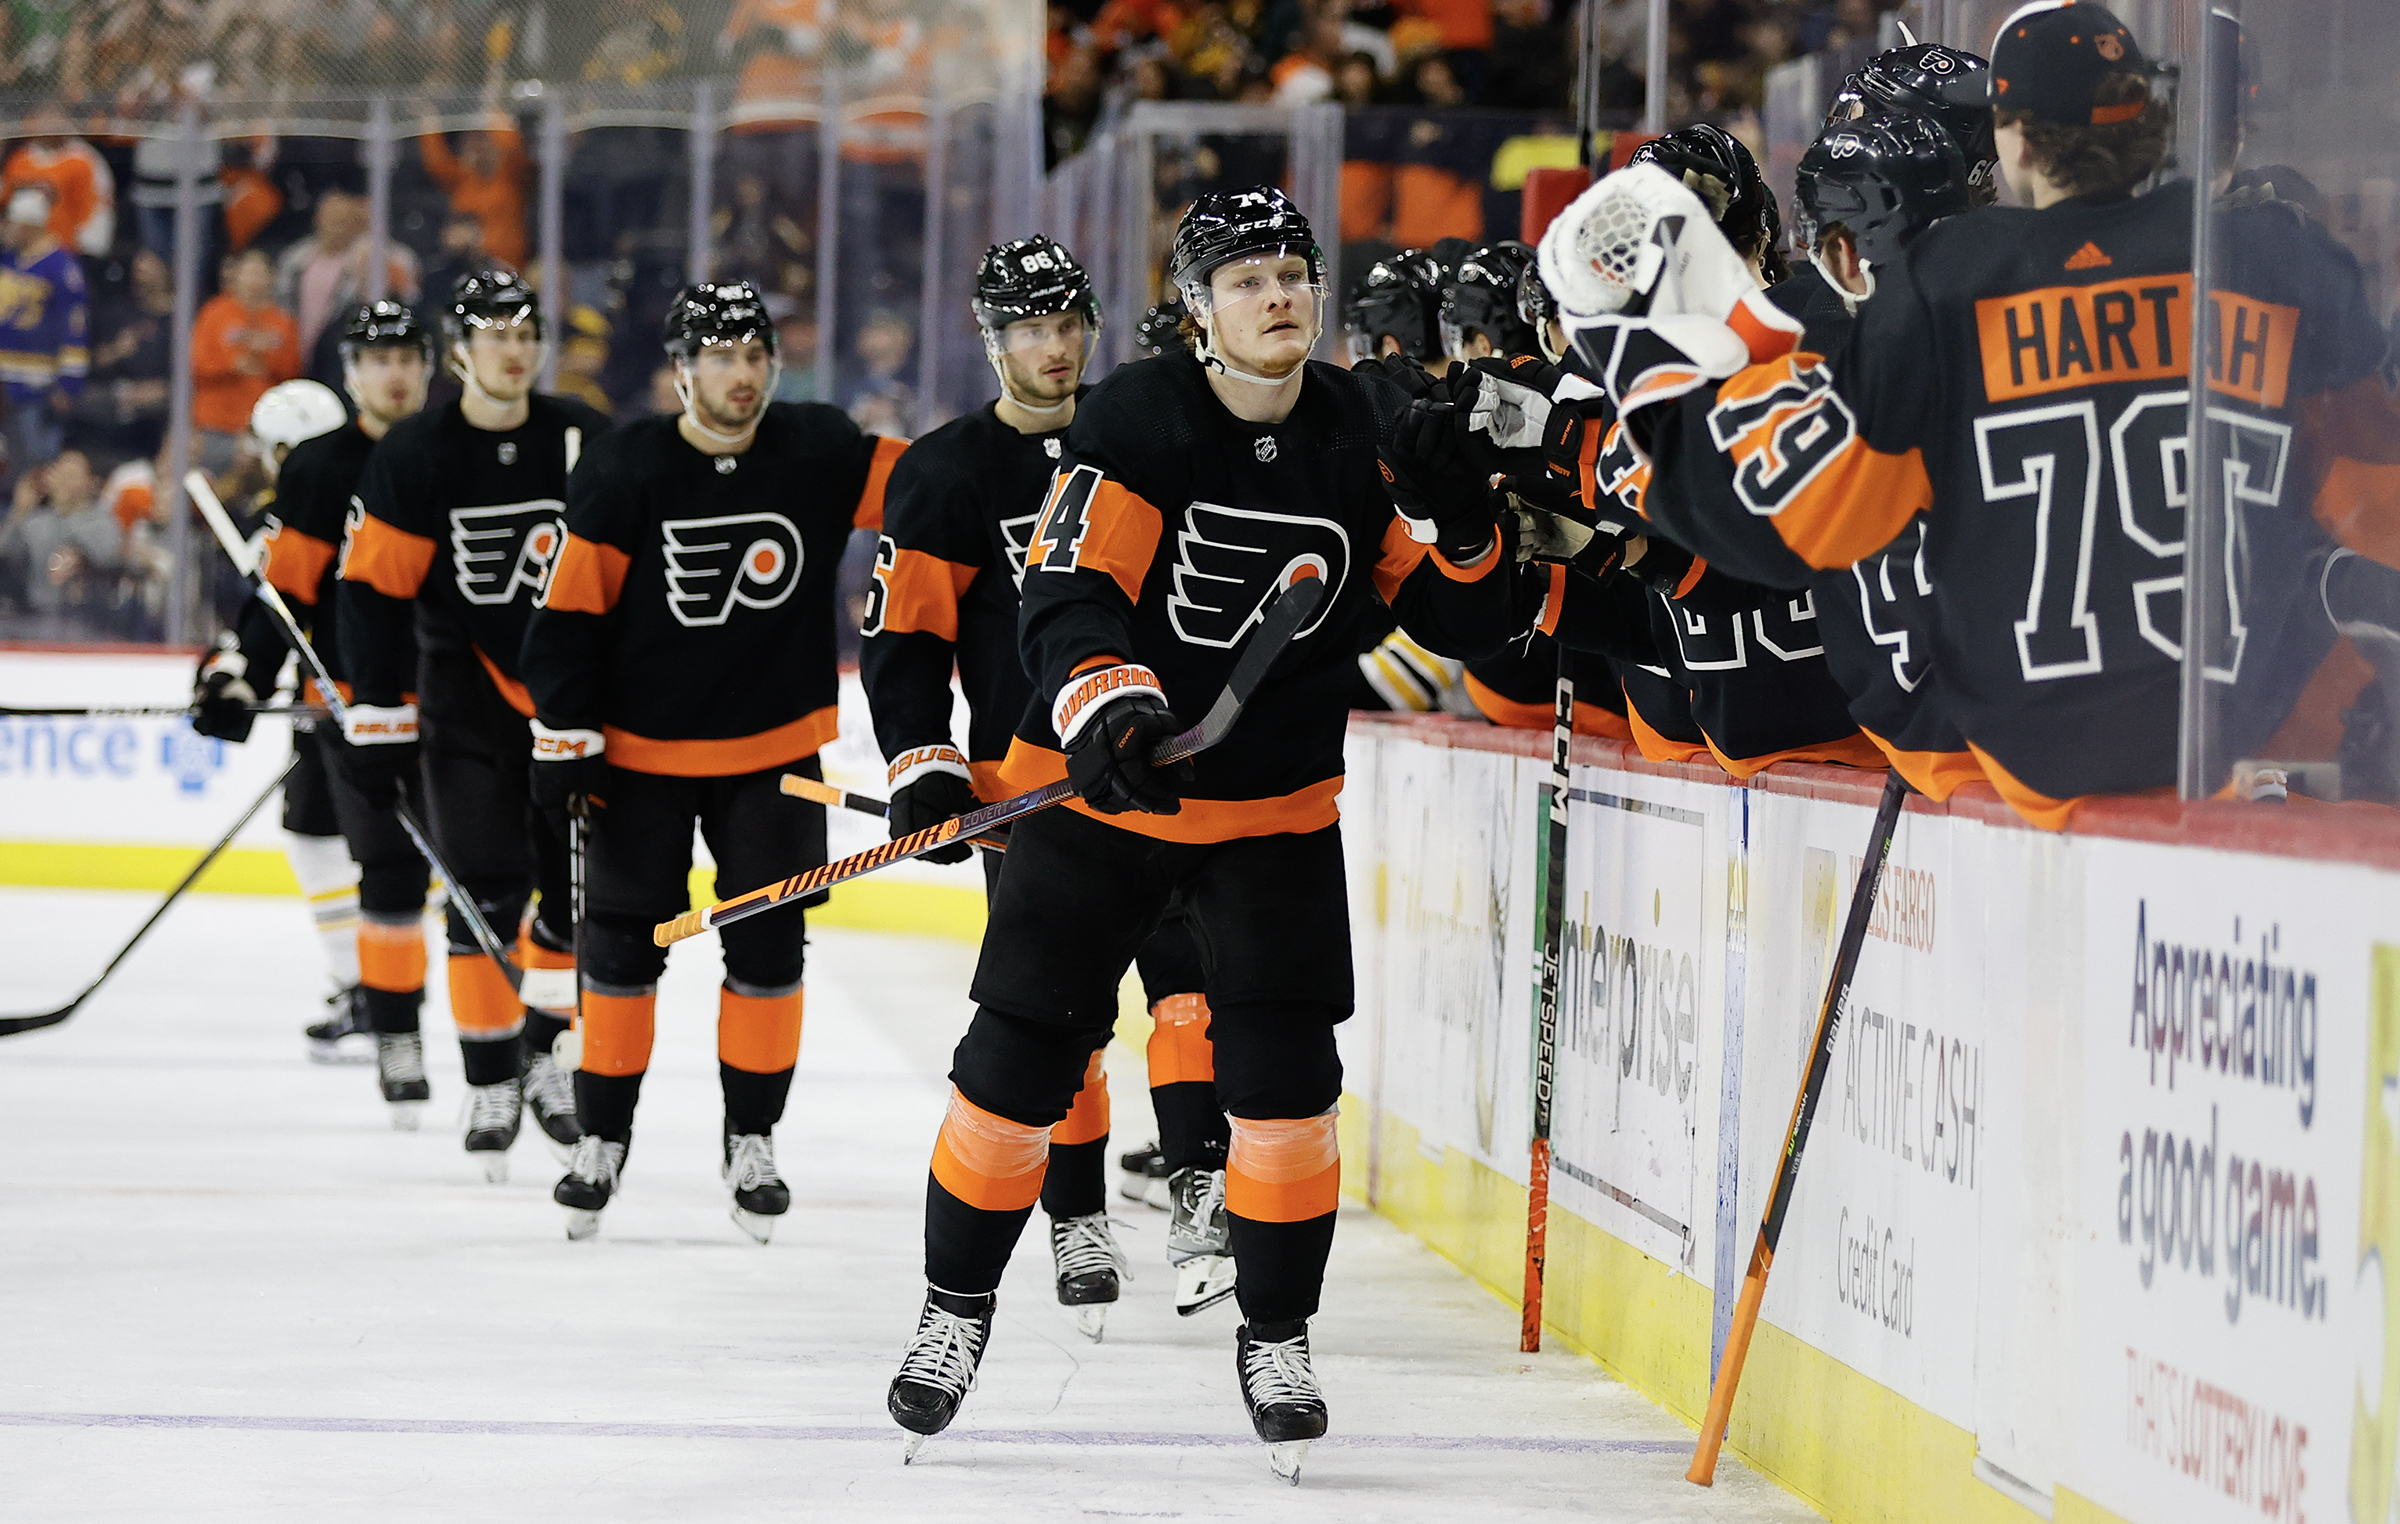 Could Flyers move Owen Tippett to left wing due to logjam on the